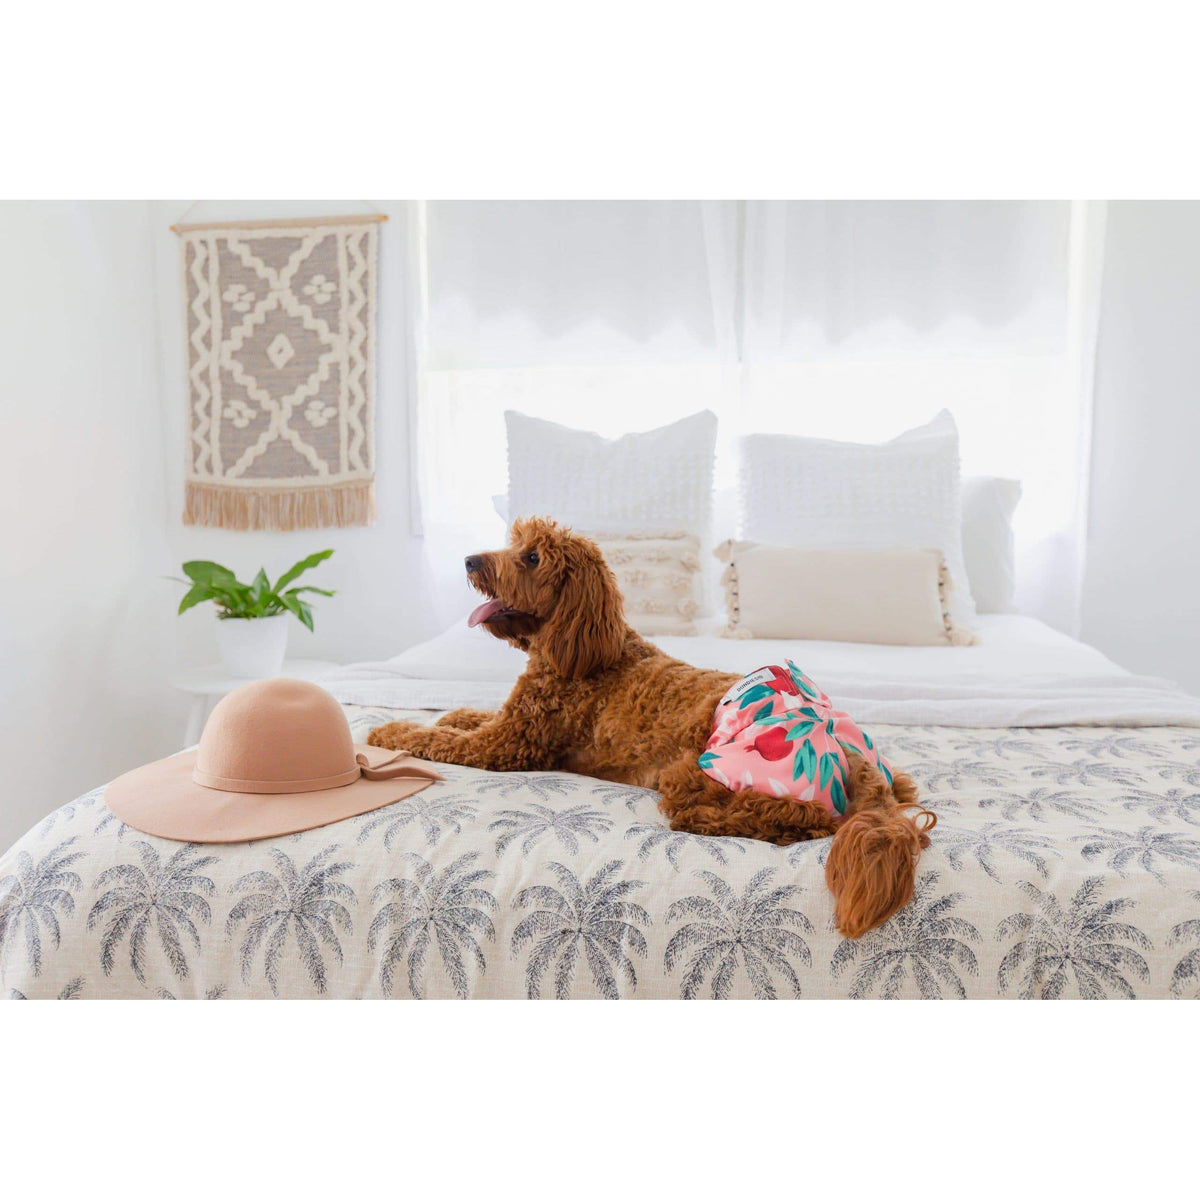 Dundies Pomegranate All In One Nappy (AIO)-Dundies Australia - Vet Recommended Pet Nappies